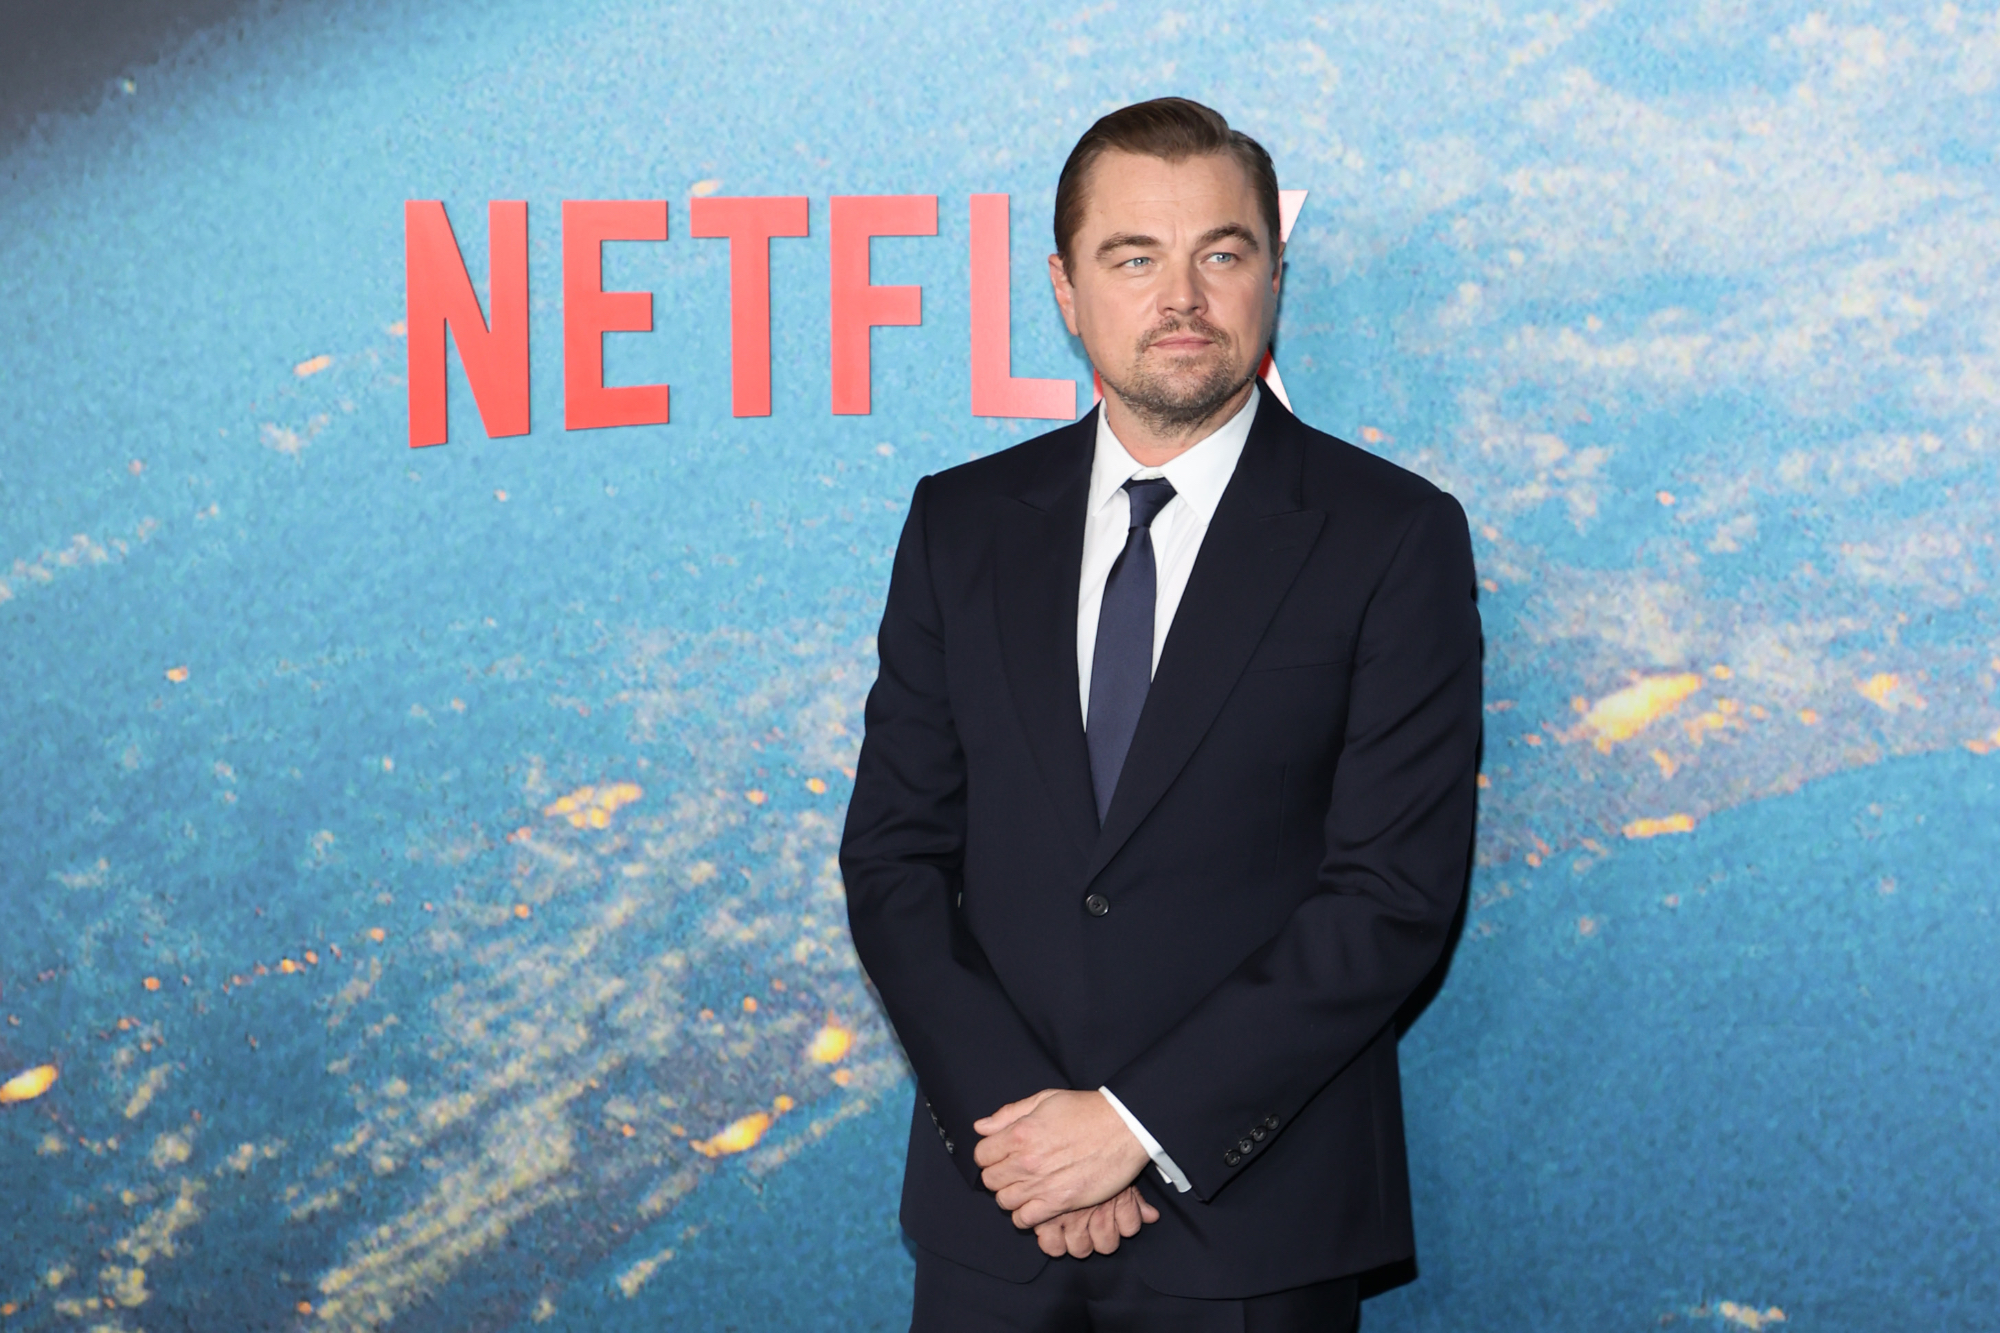 'Don't Look Up' star Leonardo DiCaprio in article about Meryl Streep nude scene standing in front of Netflix logo in a suit